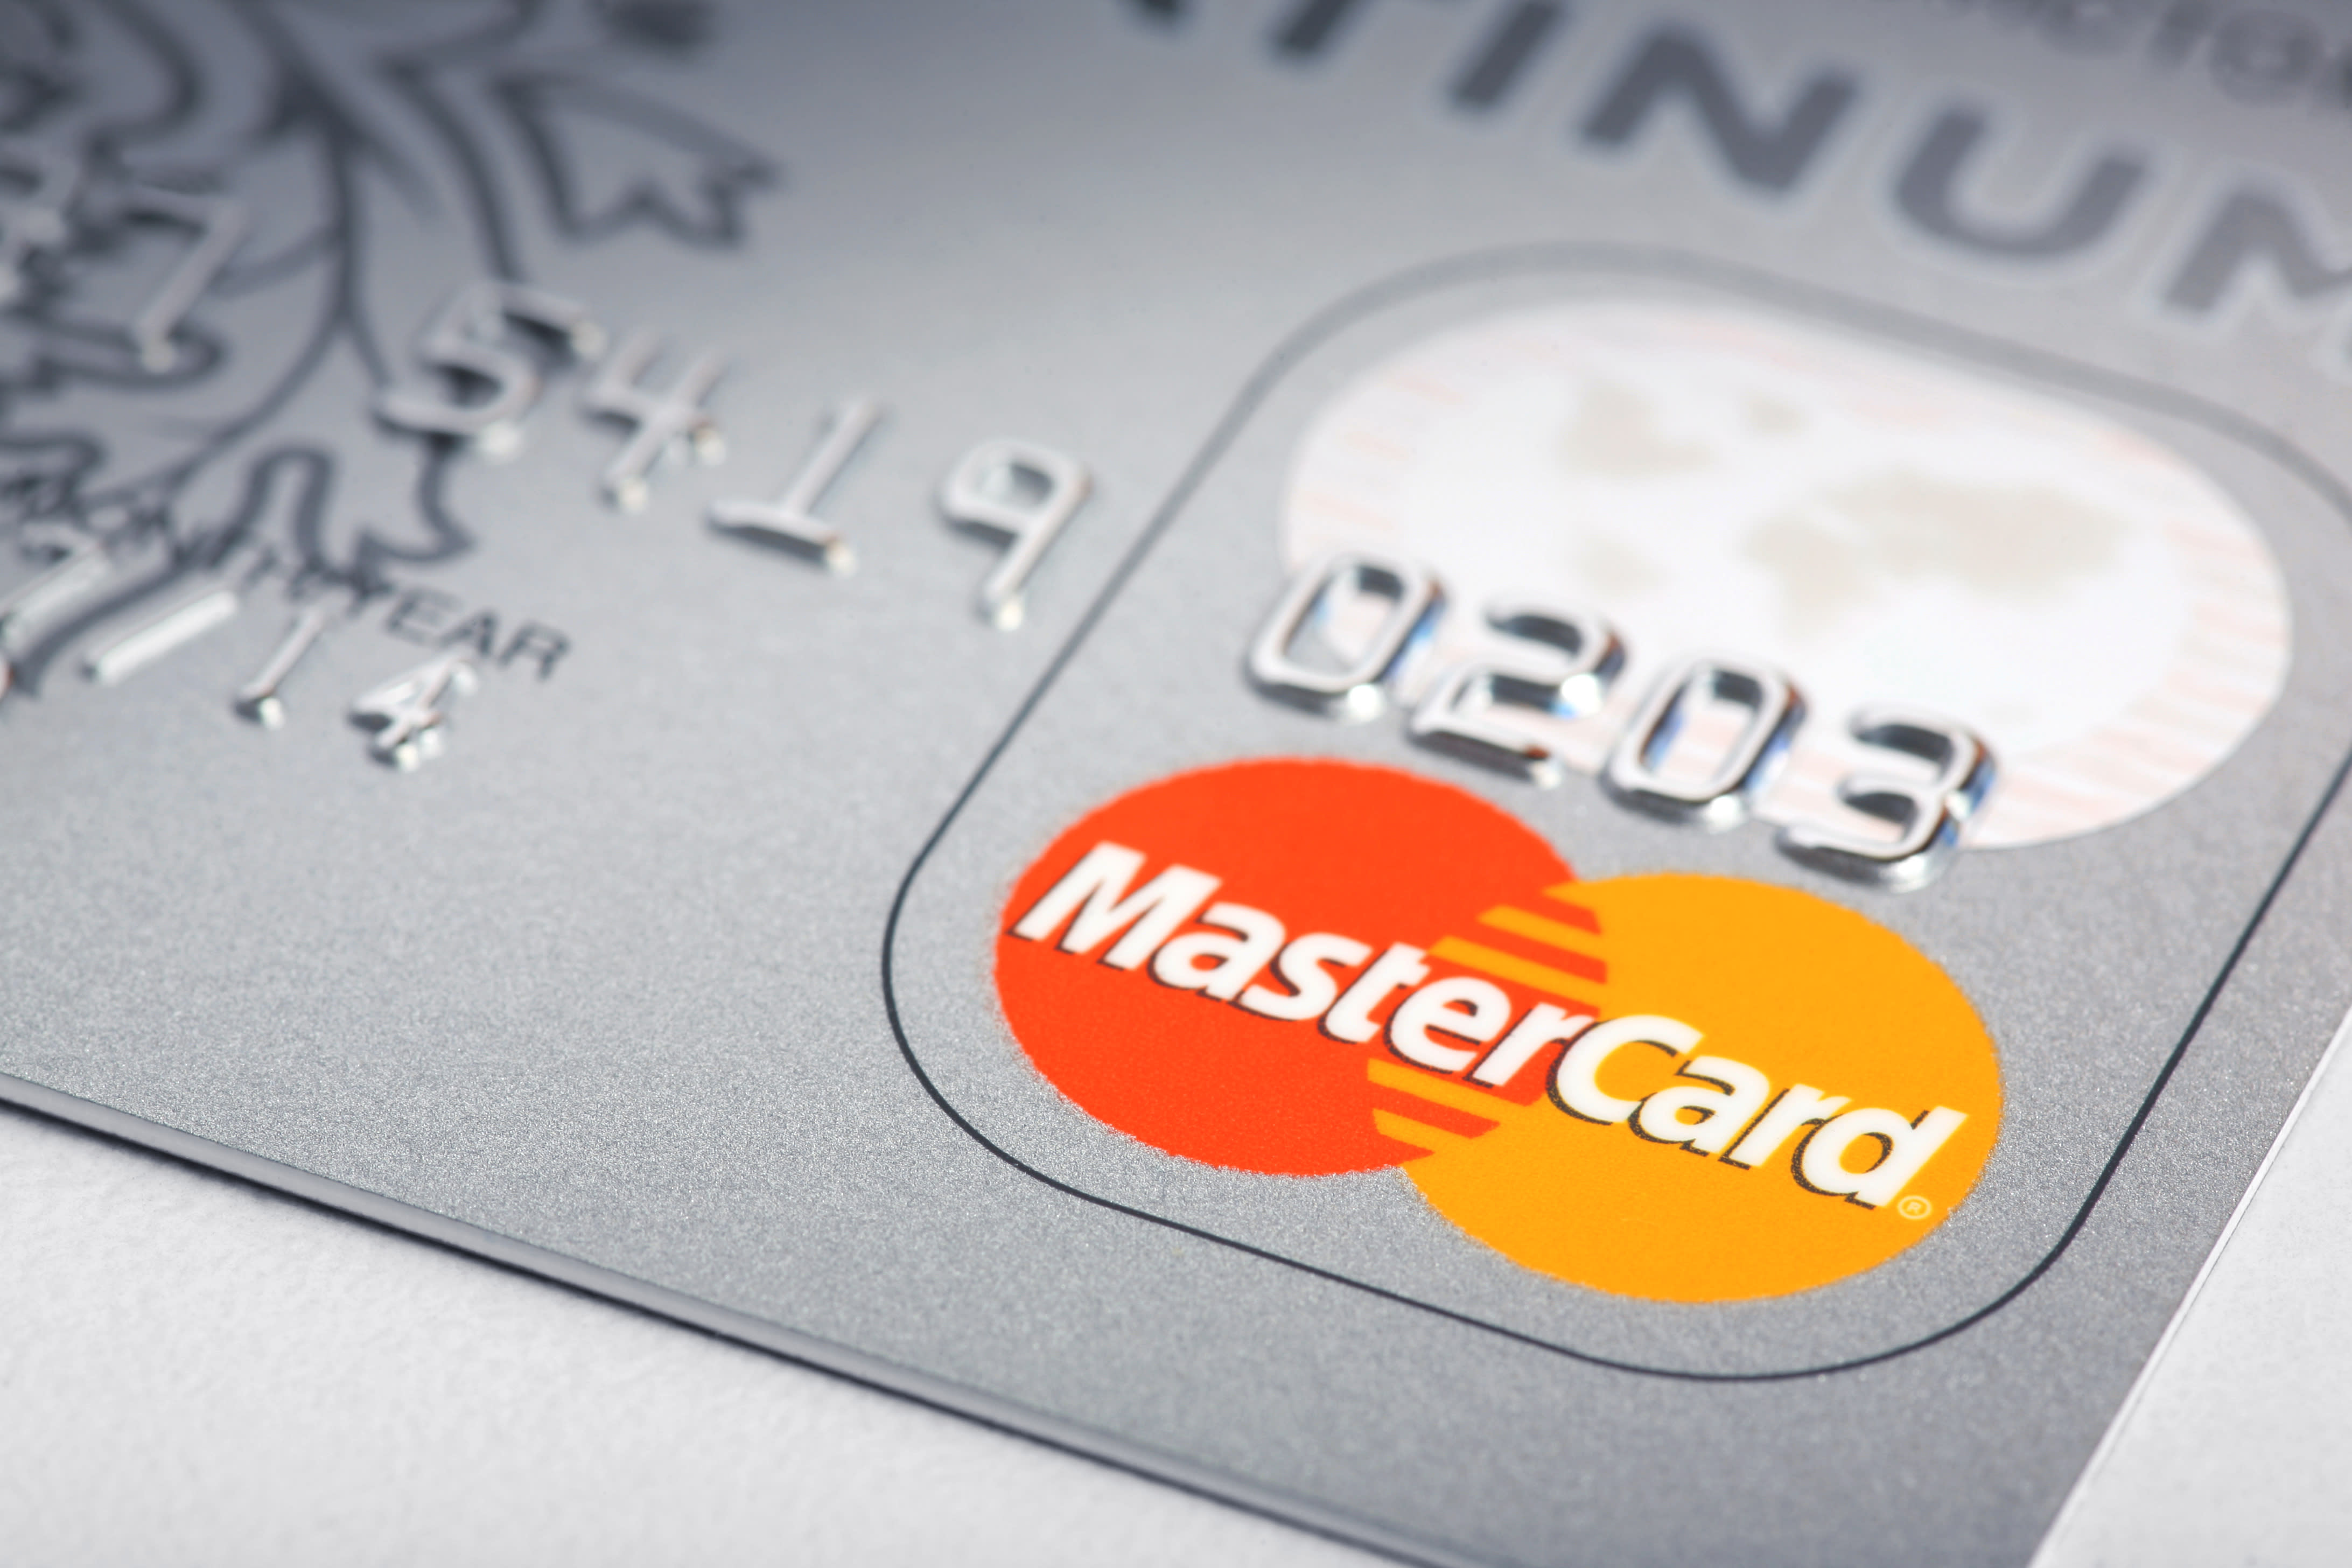 Mastercard commits to review human rights governance structures [Video]